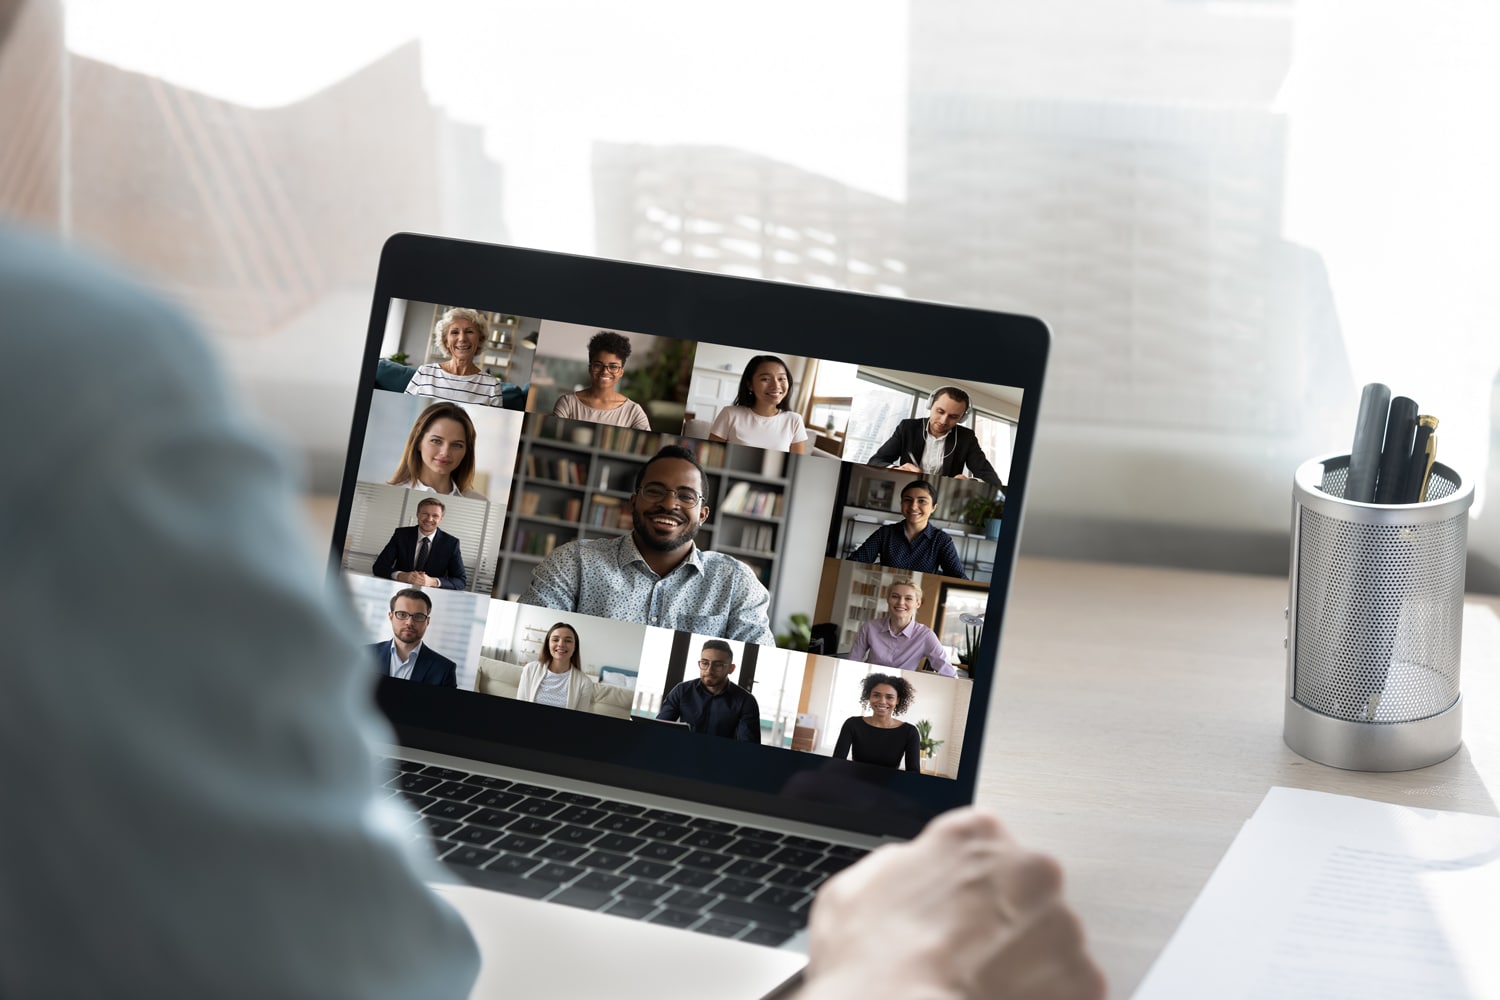 A person attends a virtual event on their laptop. The screen is filled with the faces of professional business people.